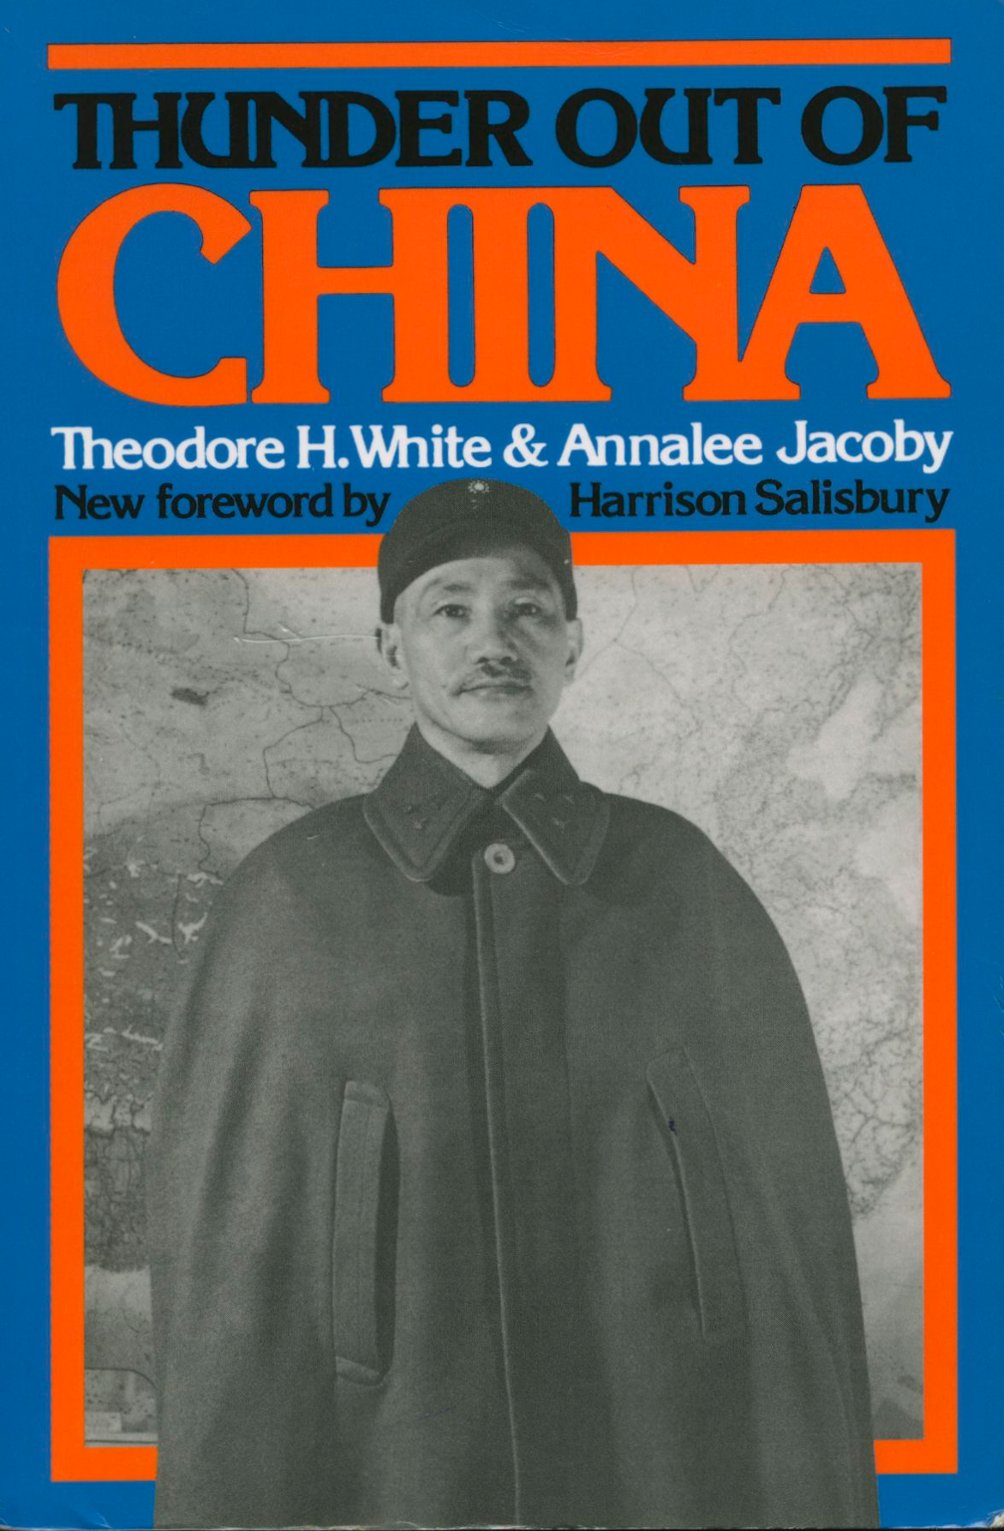 Thunder Out of China, by Theodore H. White and Annalee Jacoby, soft bound, 331 pages (1 lb 4 oz)